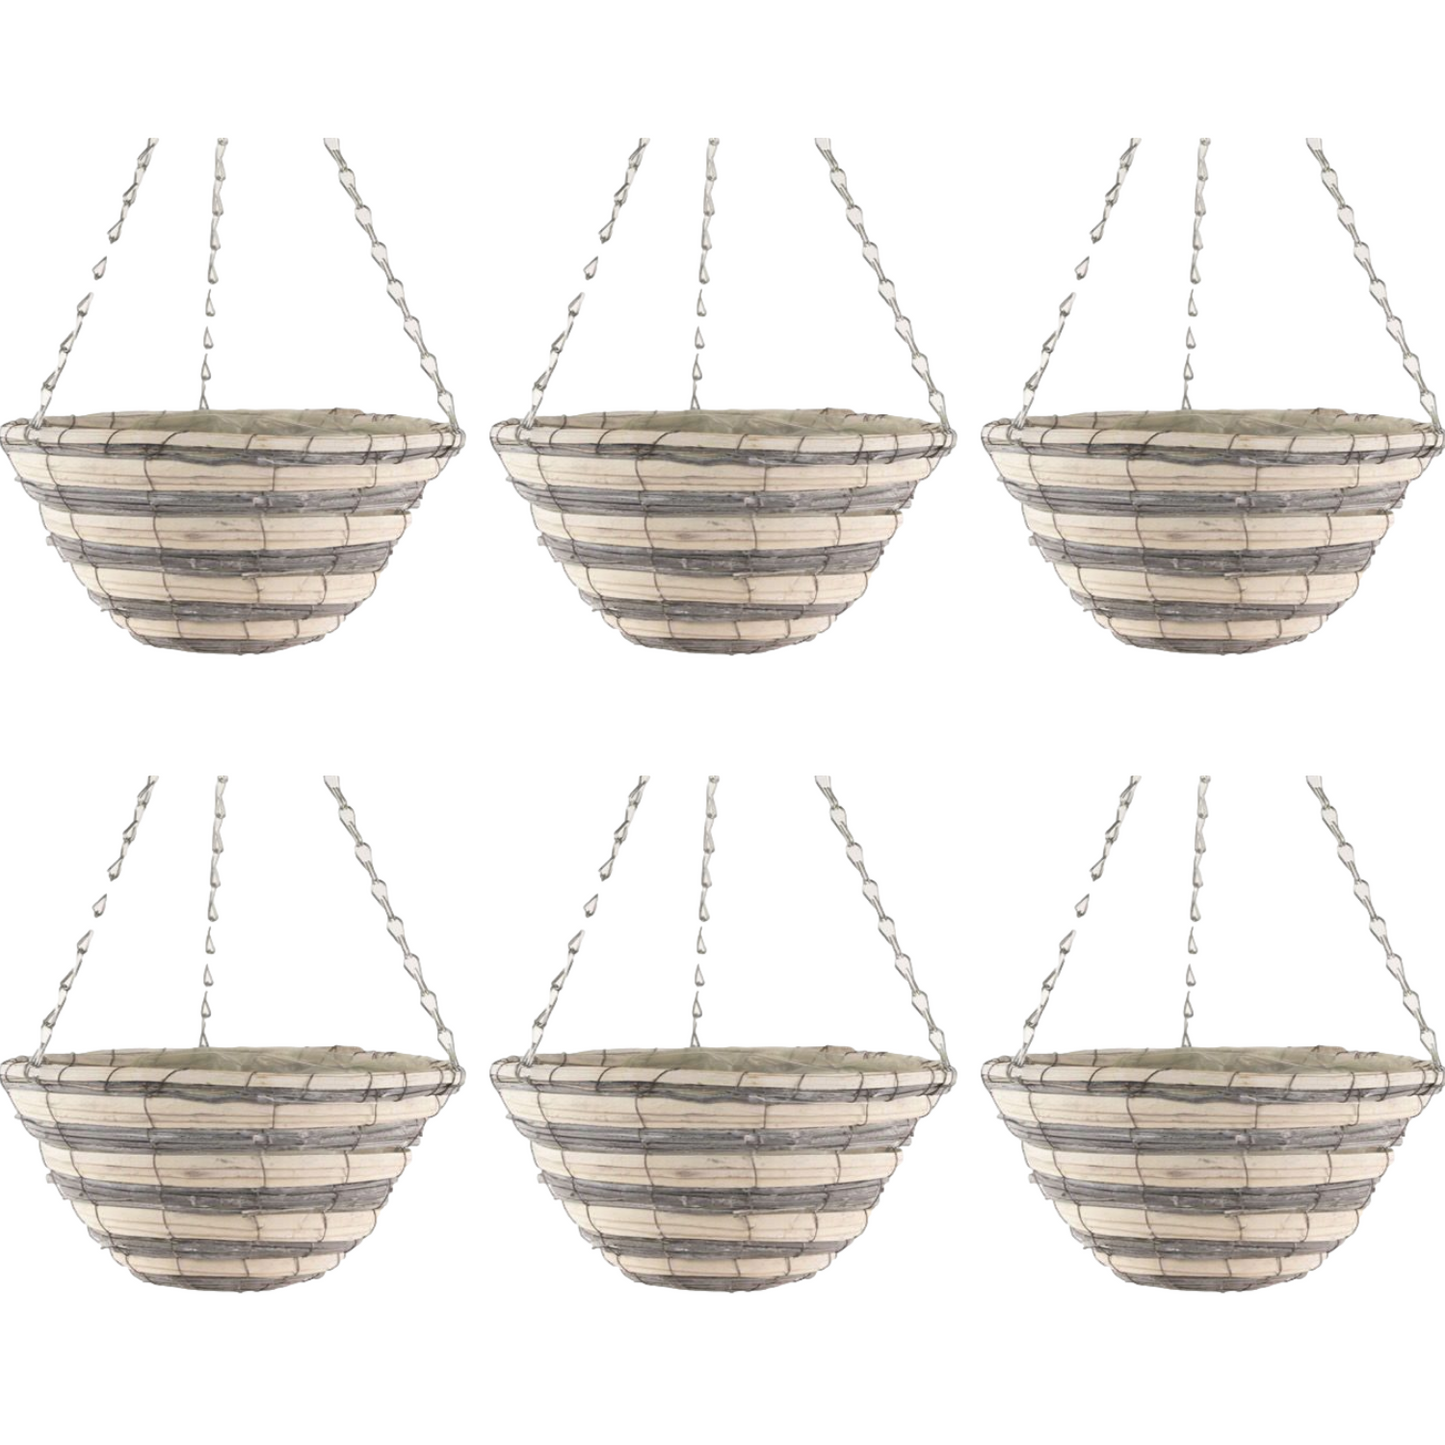 6X 30cm 12Inch Natural Grey Cream Wicker Hanging Basket Lined Willow Planter